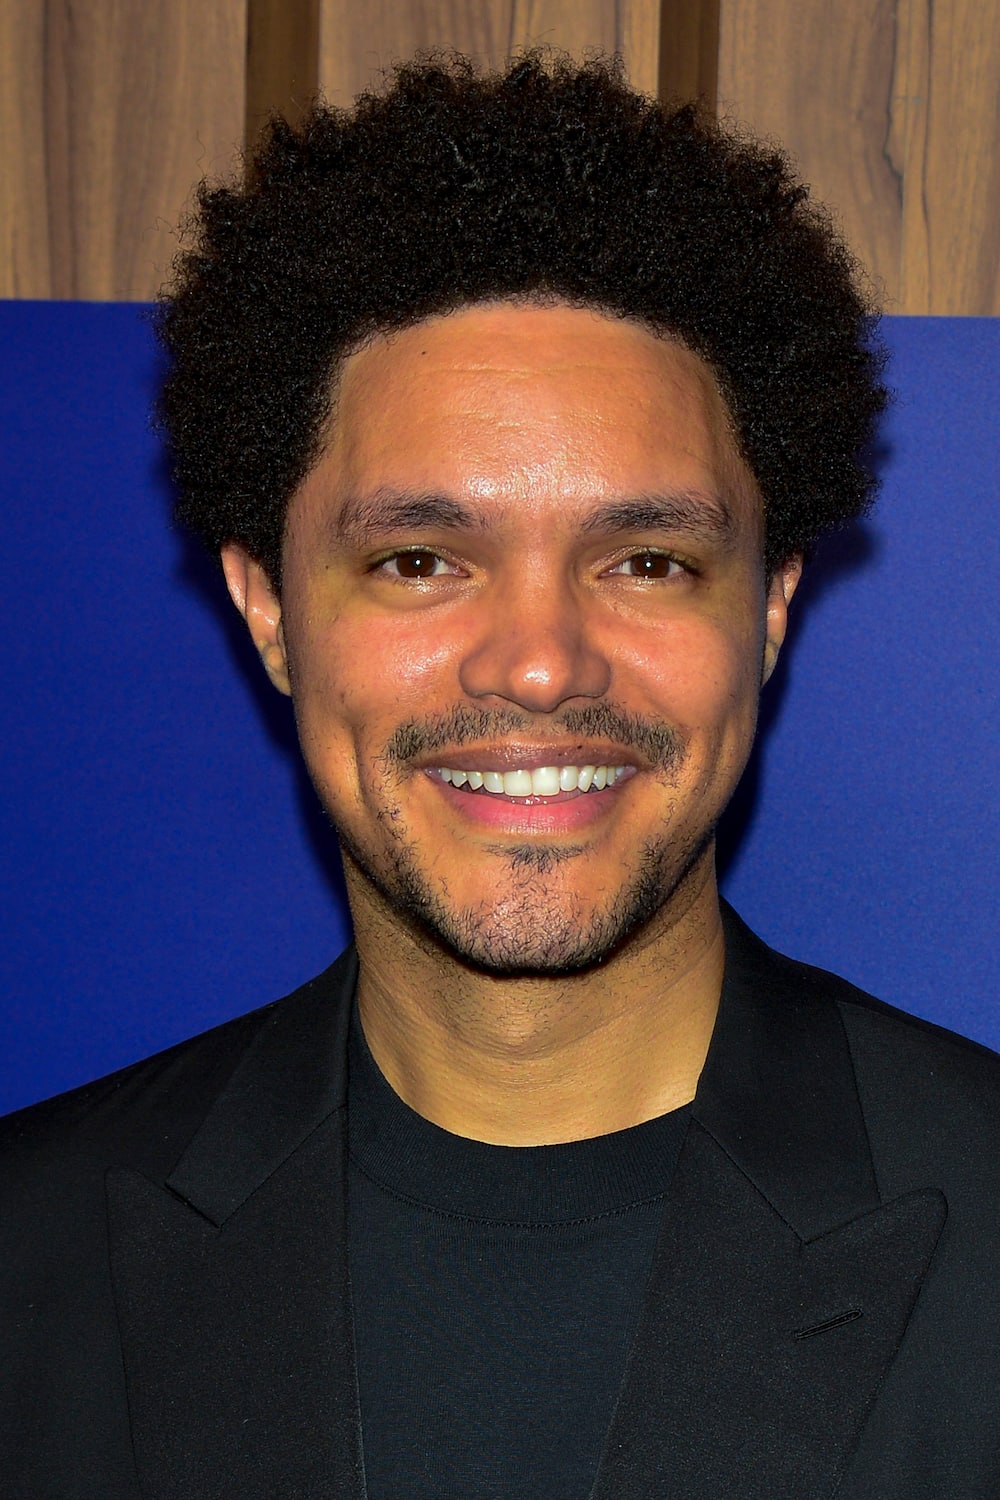 What does Trevor Noah's father do?